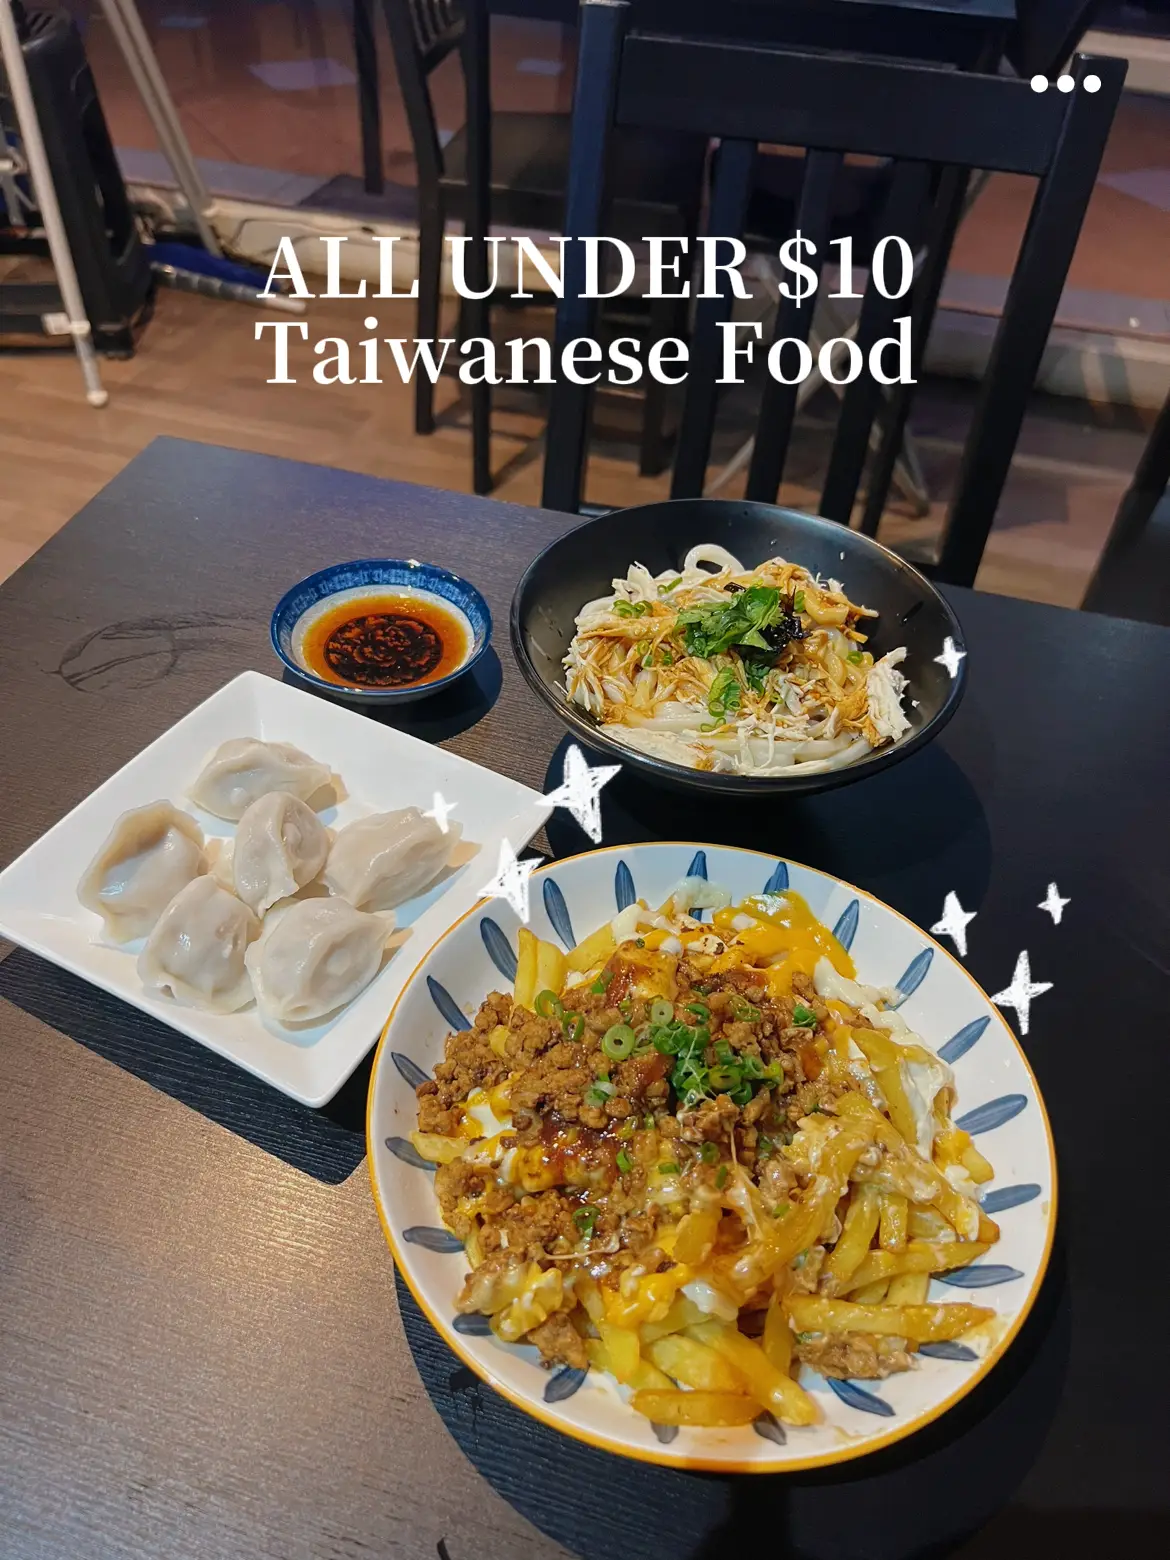 All Under $10 Taiwanese Food 🇹🇼 's images(0)